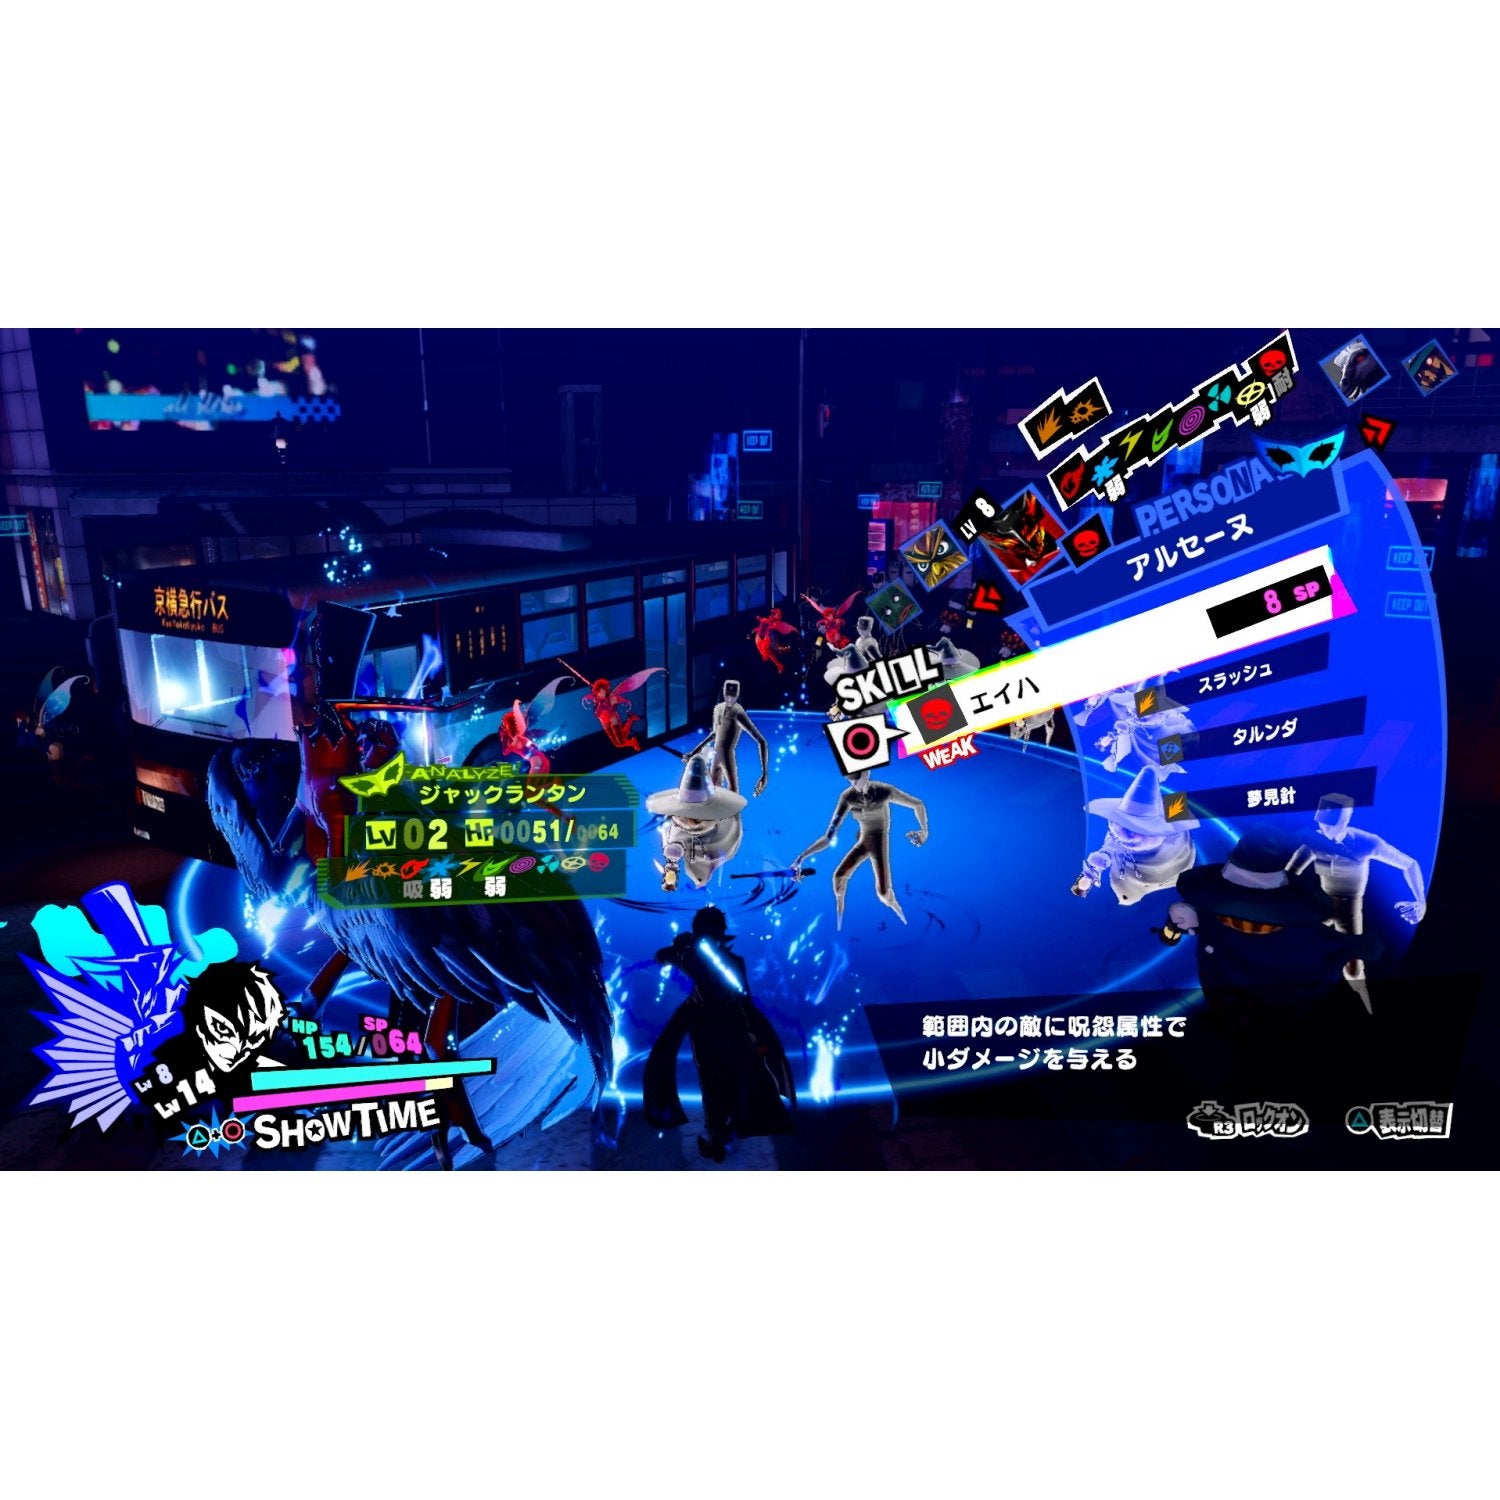 PS4 P5S: Persona 5 Strikers (NC16)